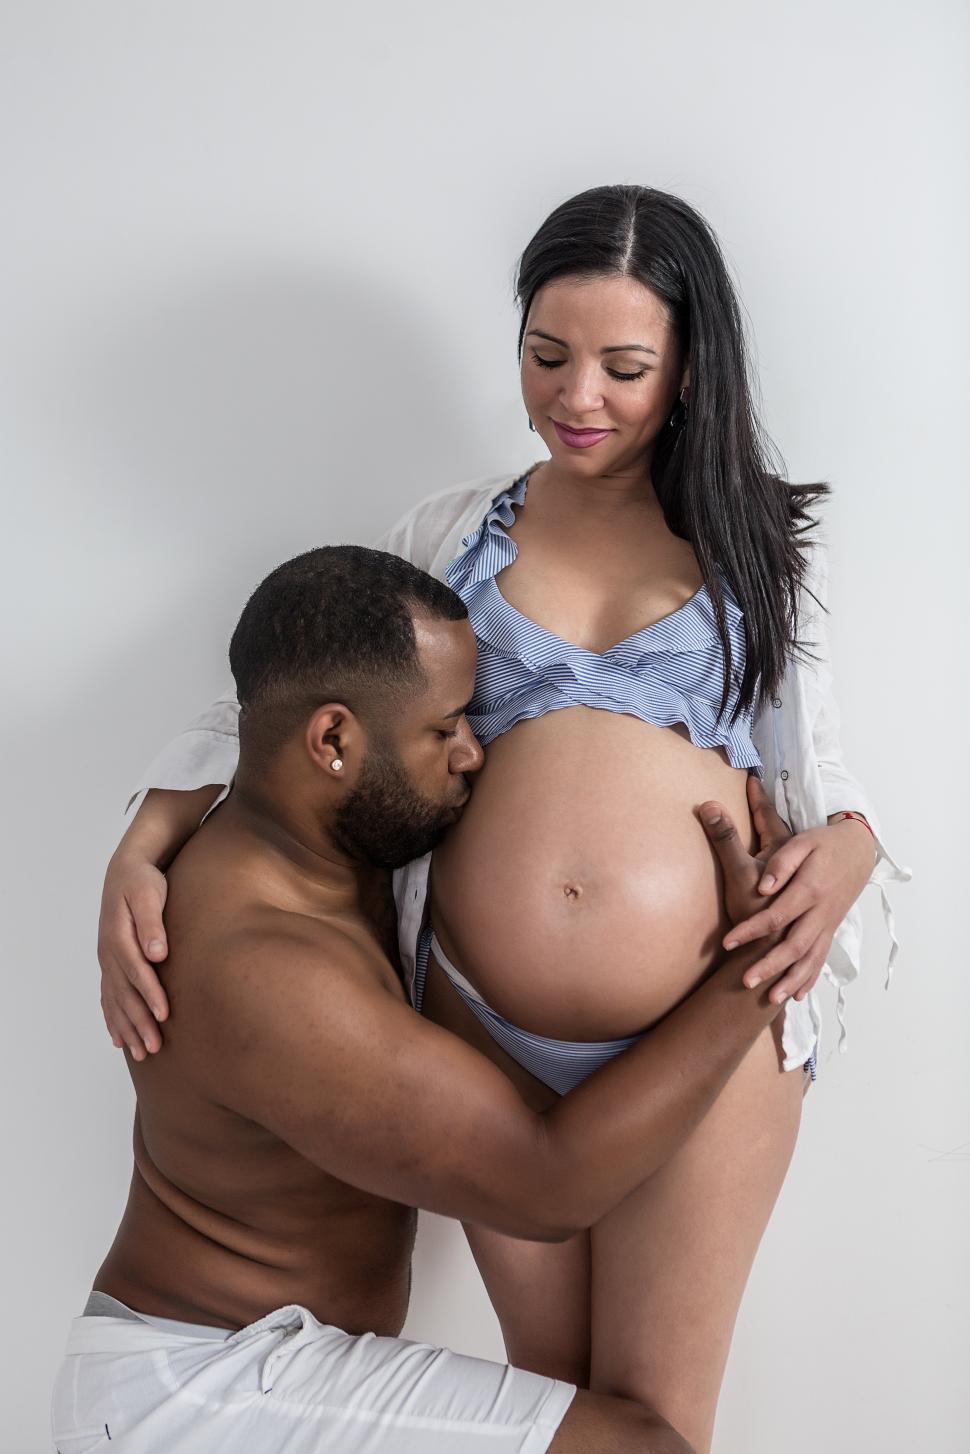 Pregnant Black Woman in Bra and Panties Stock Image - Image of